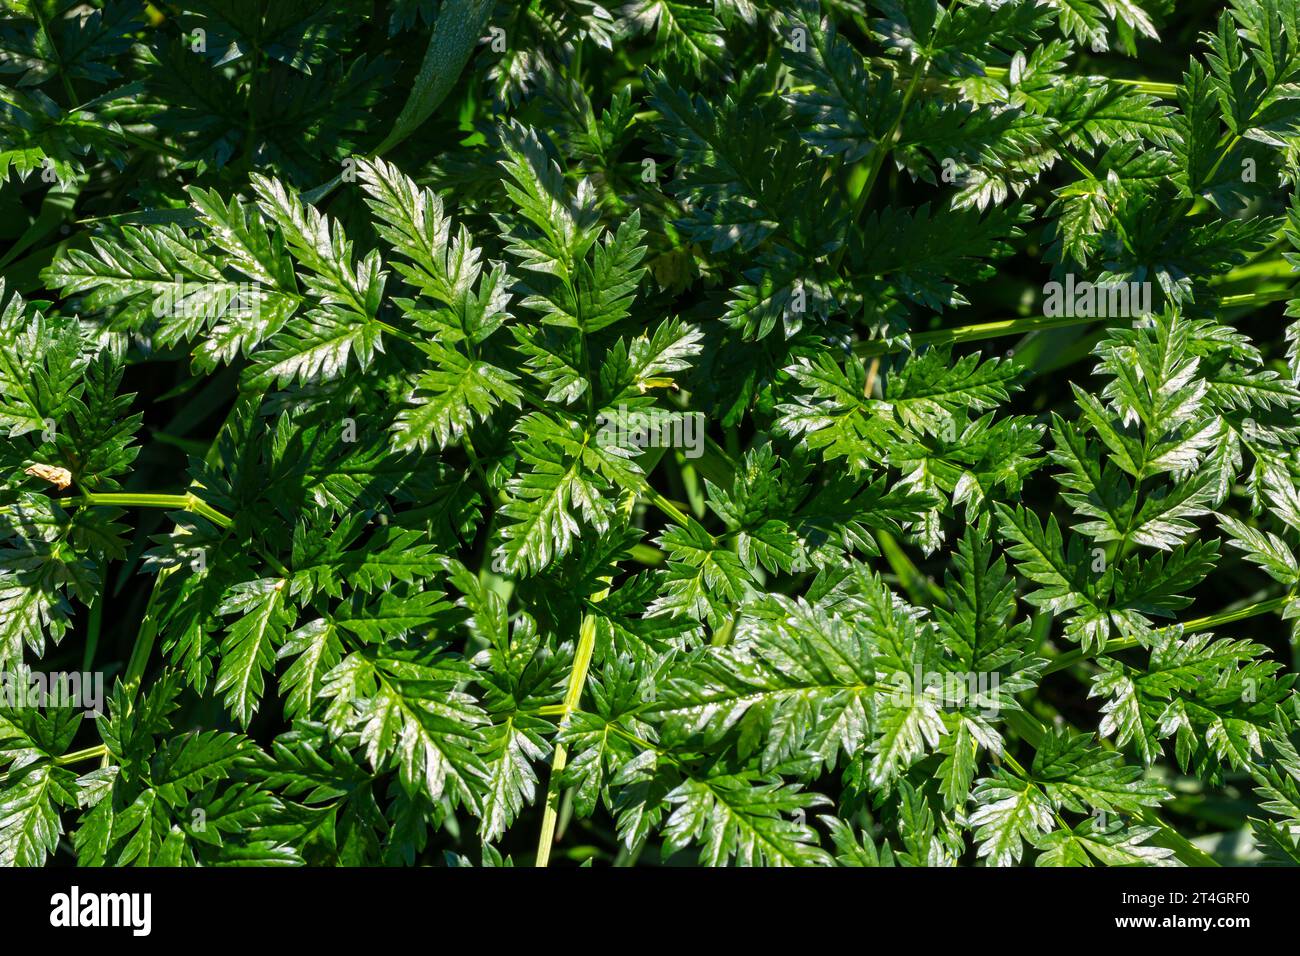 Green leaves of a Conium maculatum poison hemlock poisonous plant close-up. Concept of the texture of natural patterns, ornaments. Stock Photo